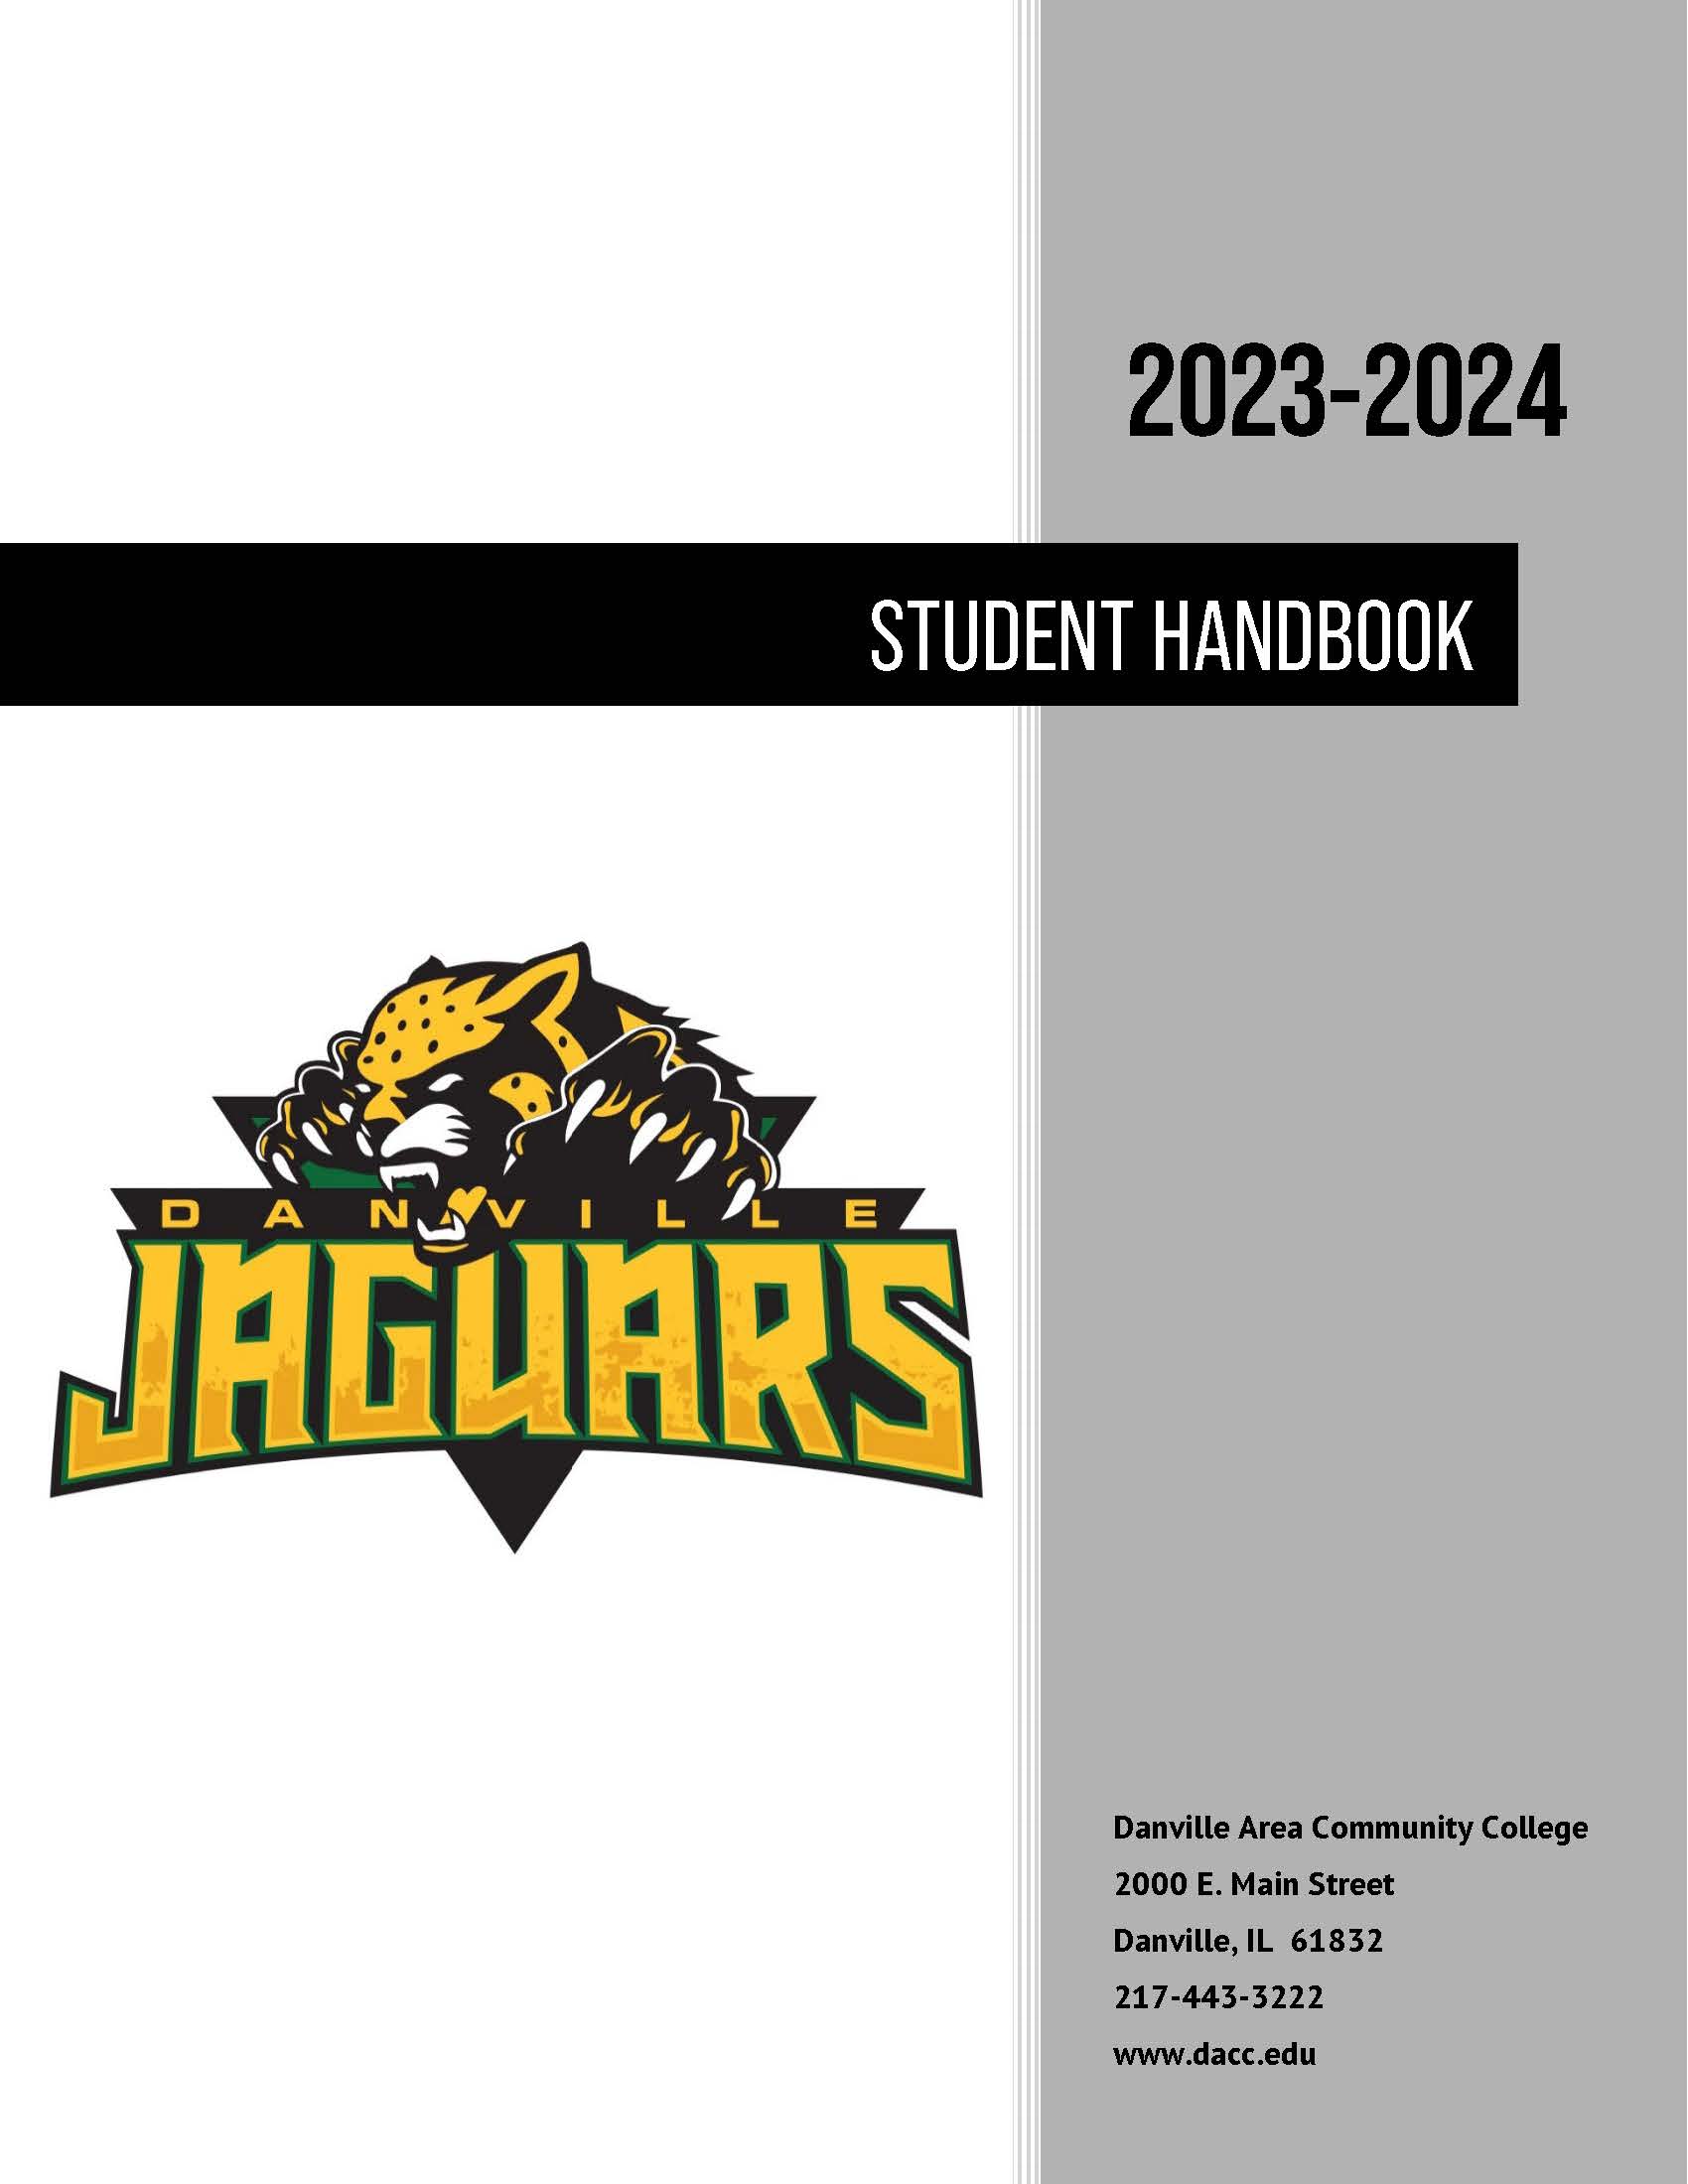 Cover of the student handbook for 2023-2024